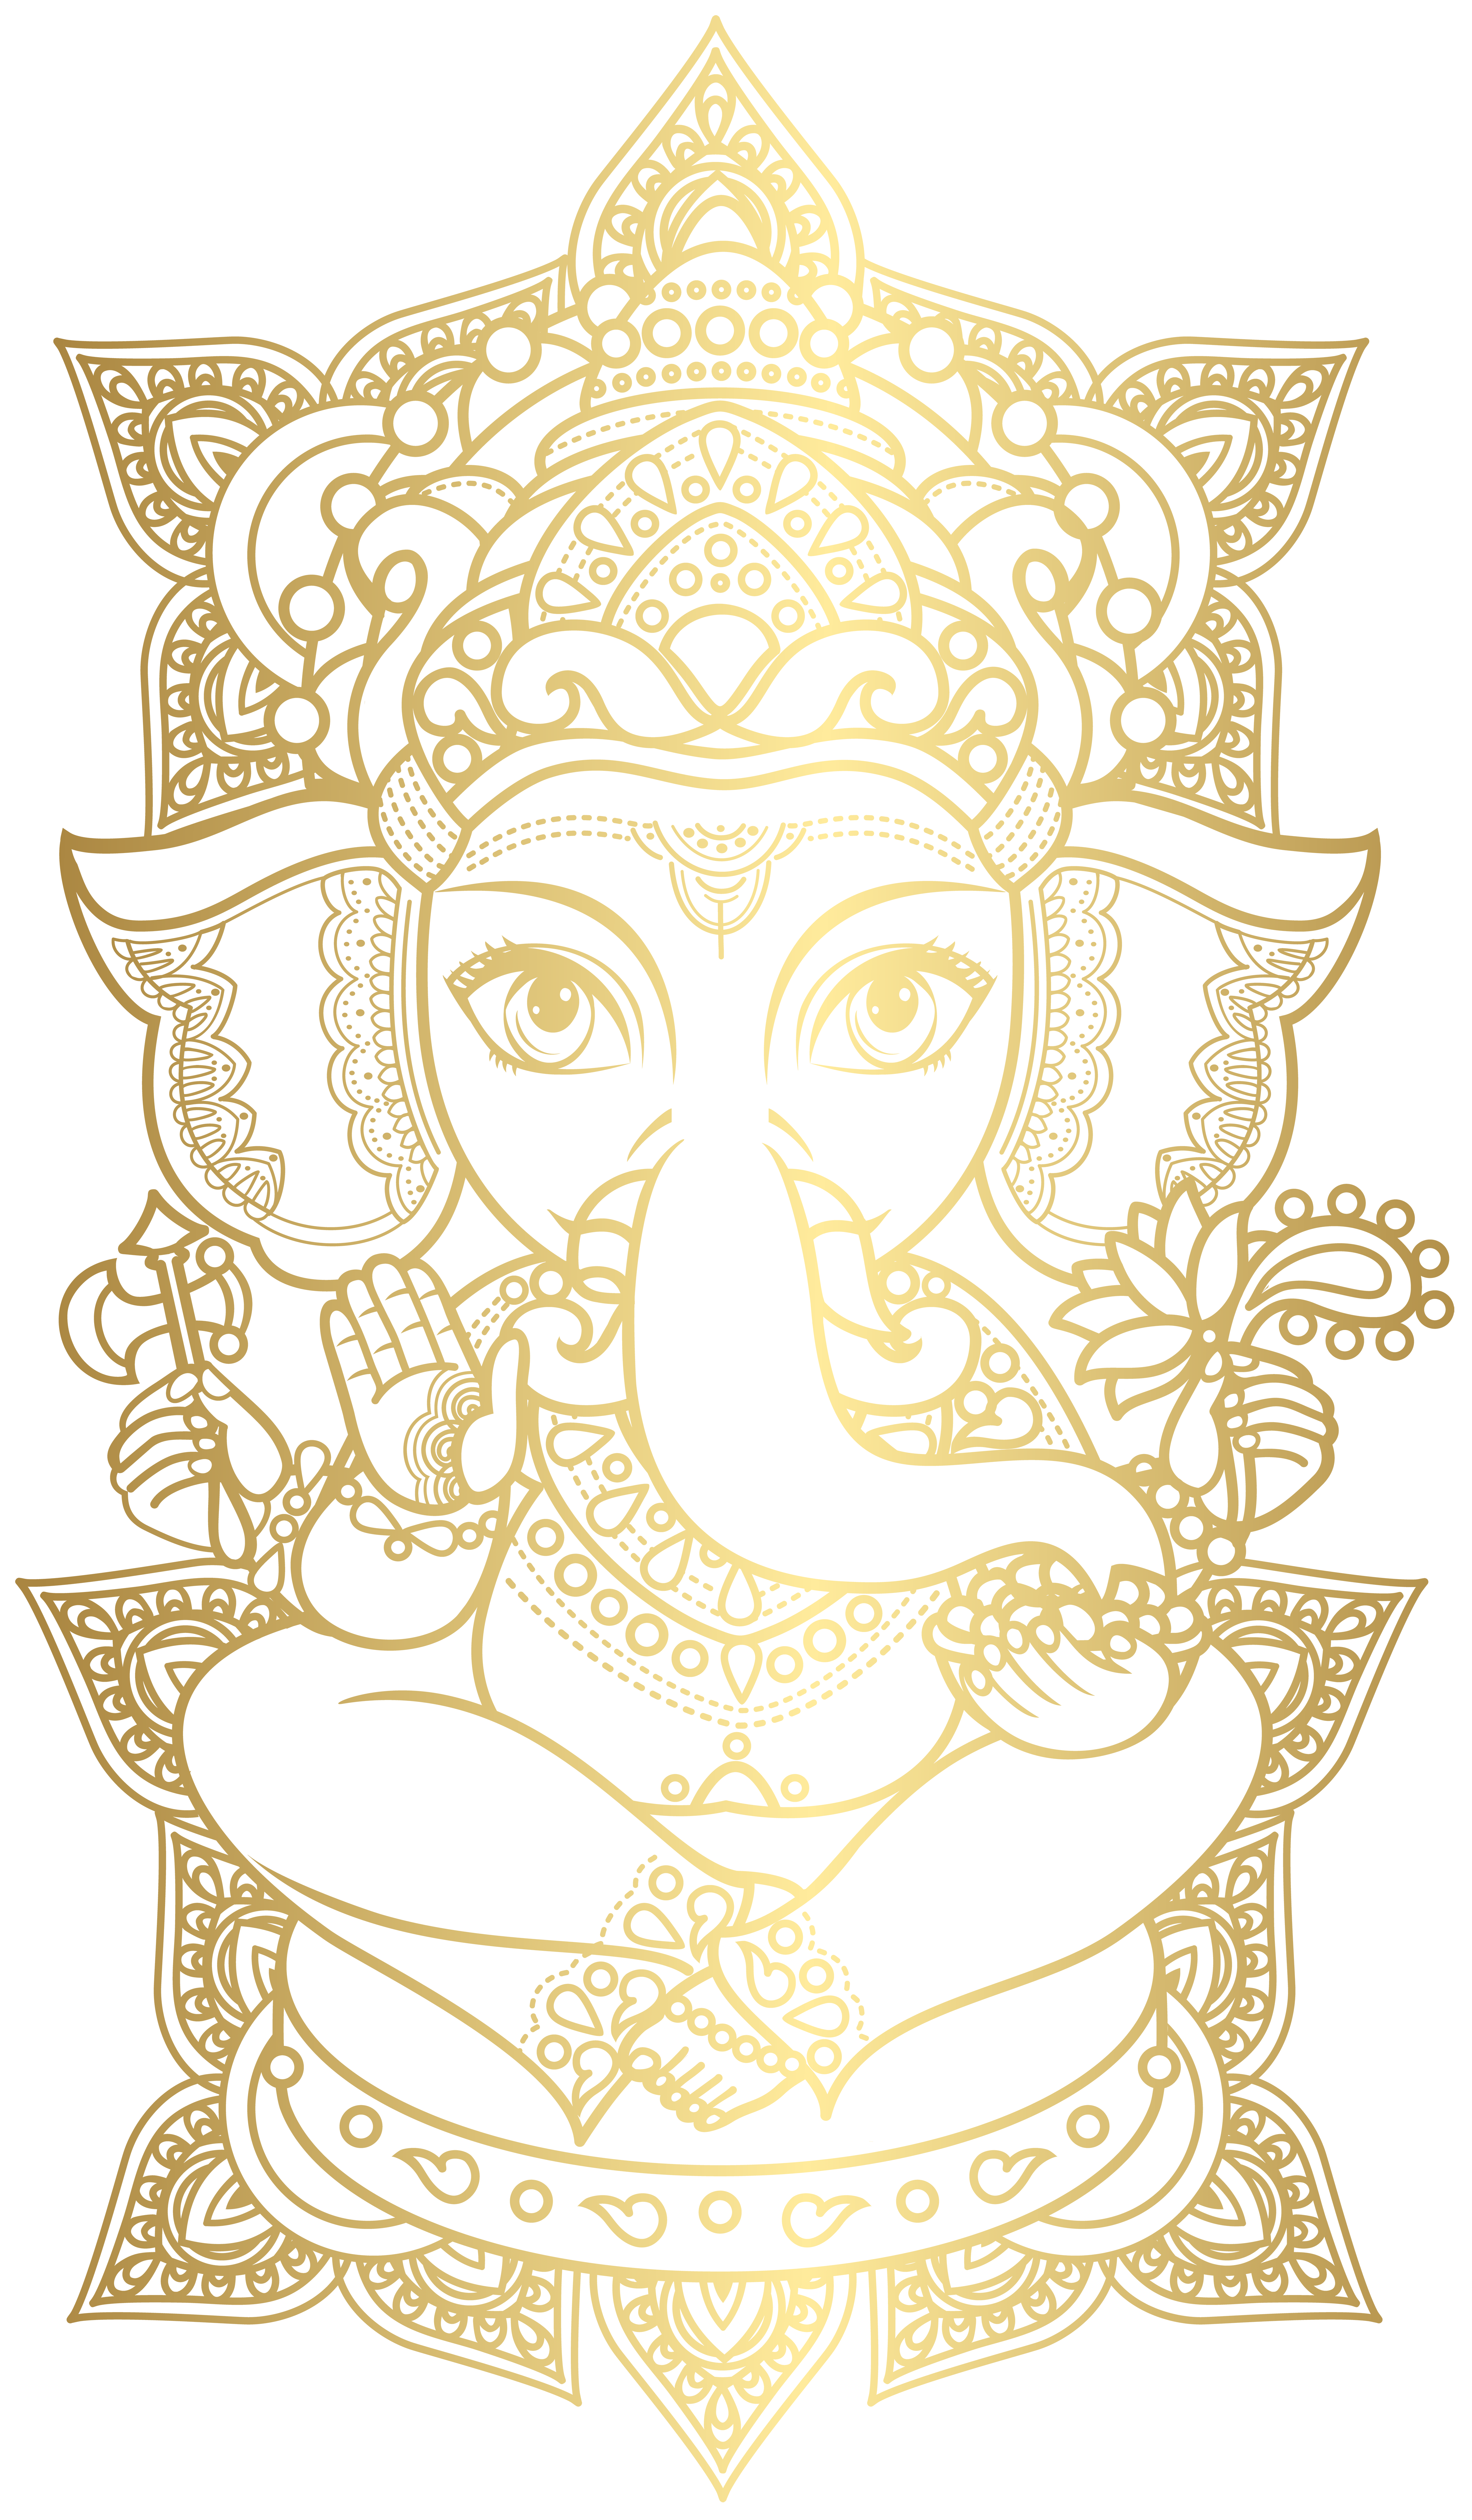 Gold Ganesha Png Clip Art Image Gallery Yopriceville High Quality Images And Transparent Png Free Clipart